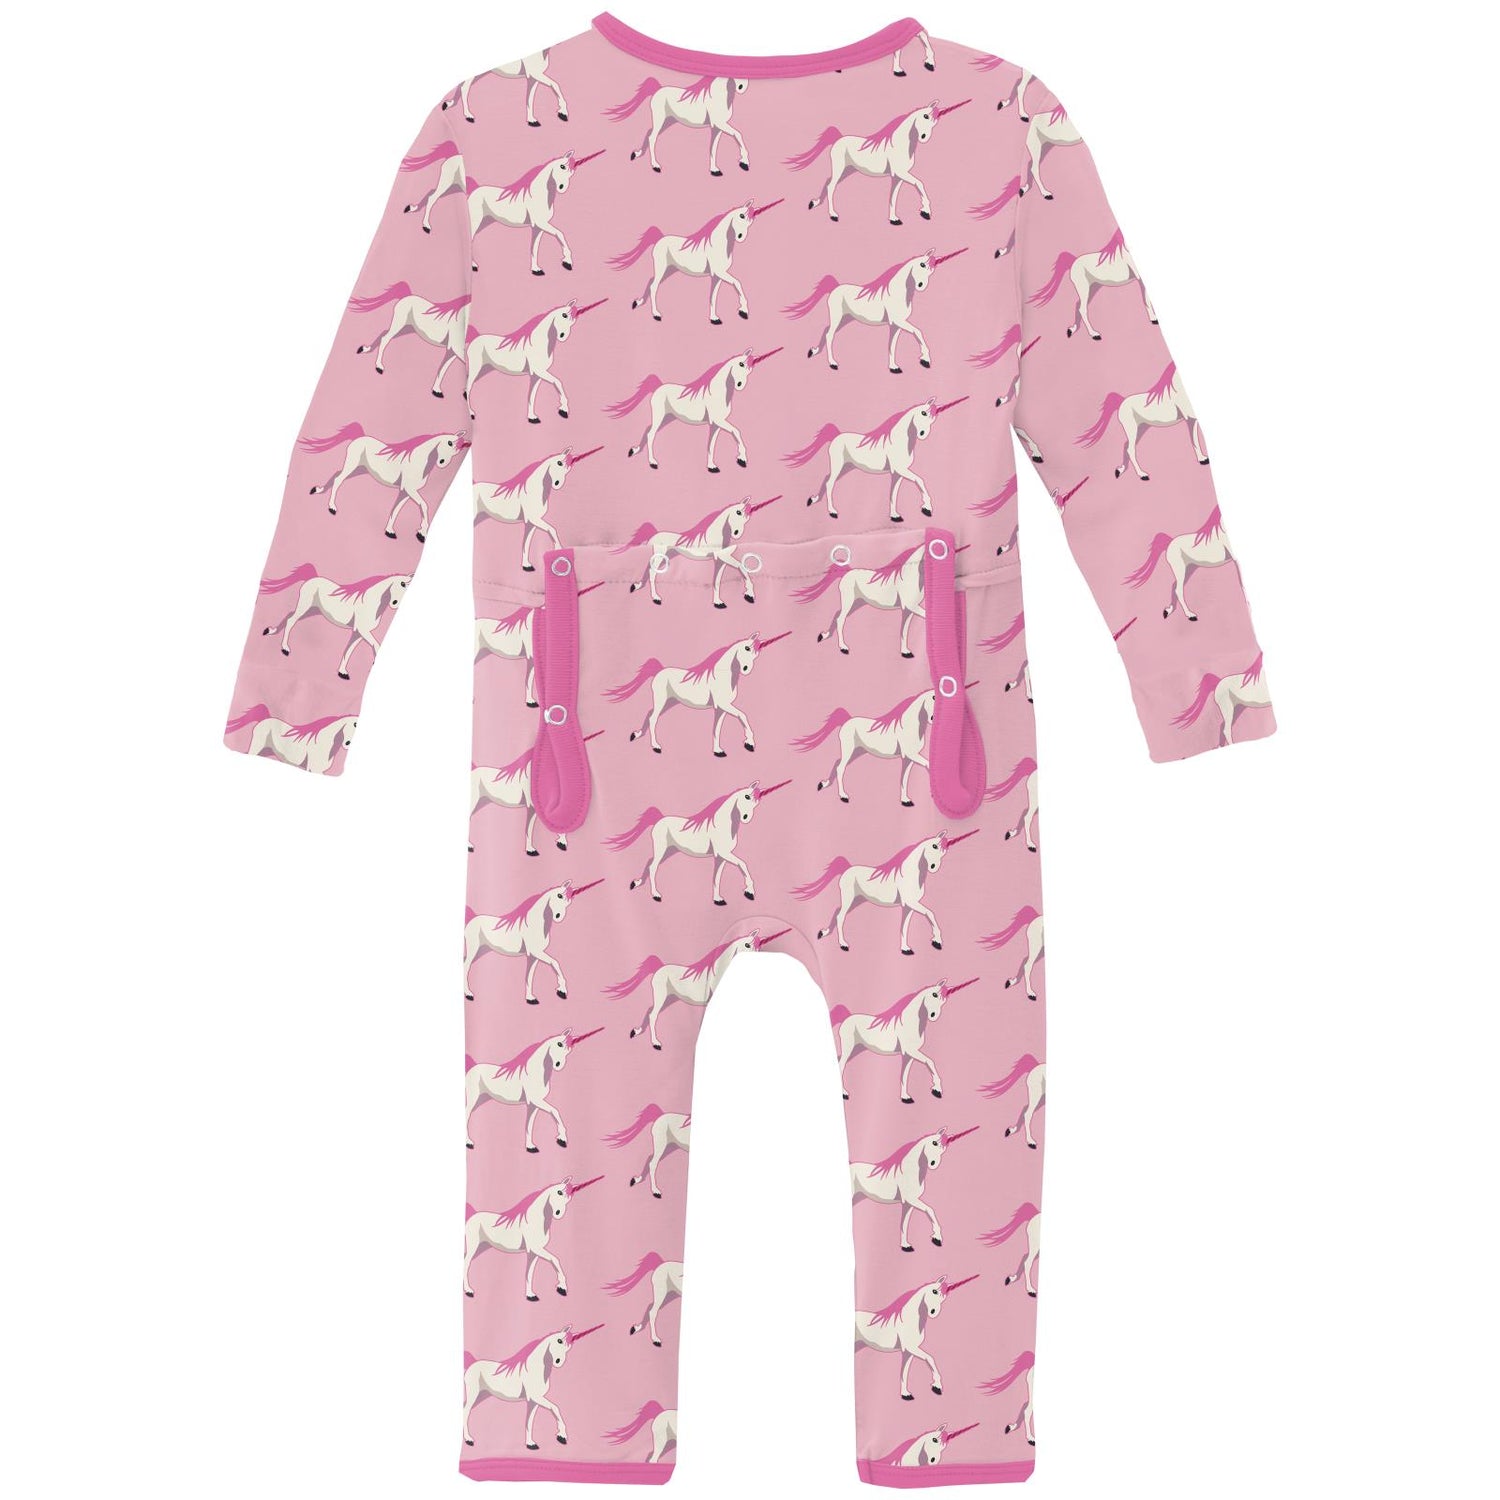 Print Coverall with 2 Way Zipper in Cake Pop Prancing Unicorn